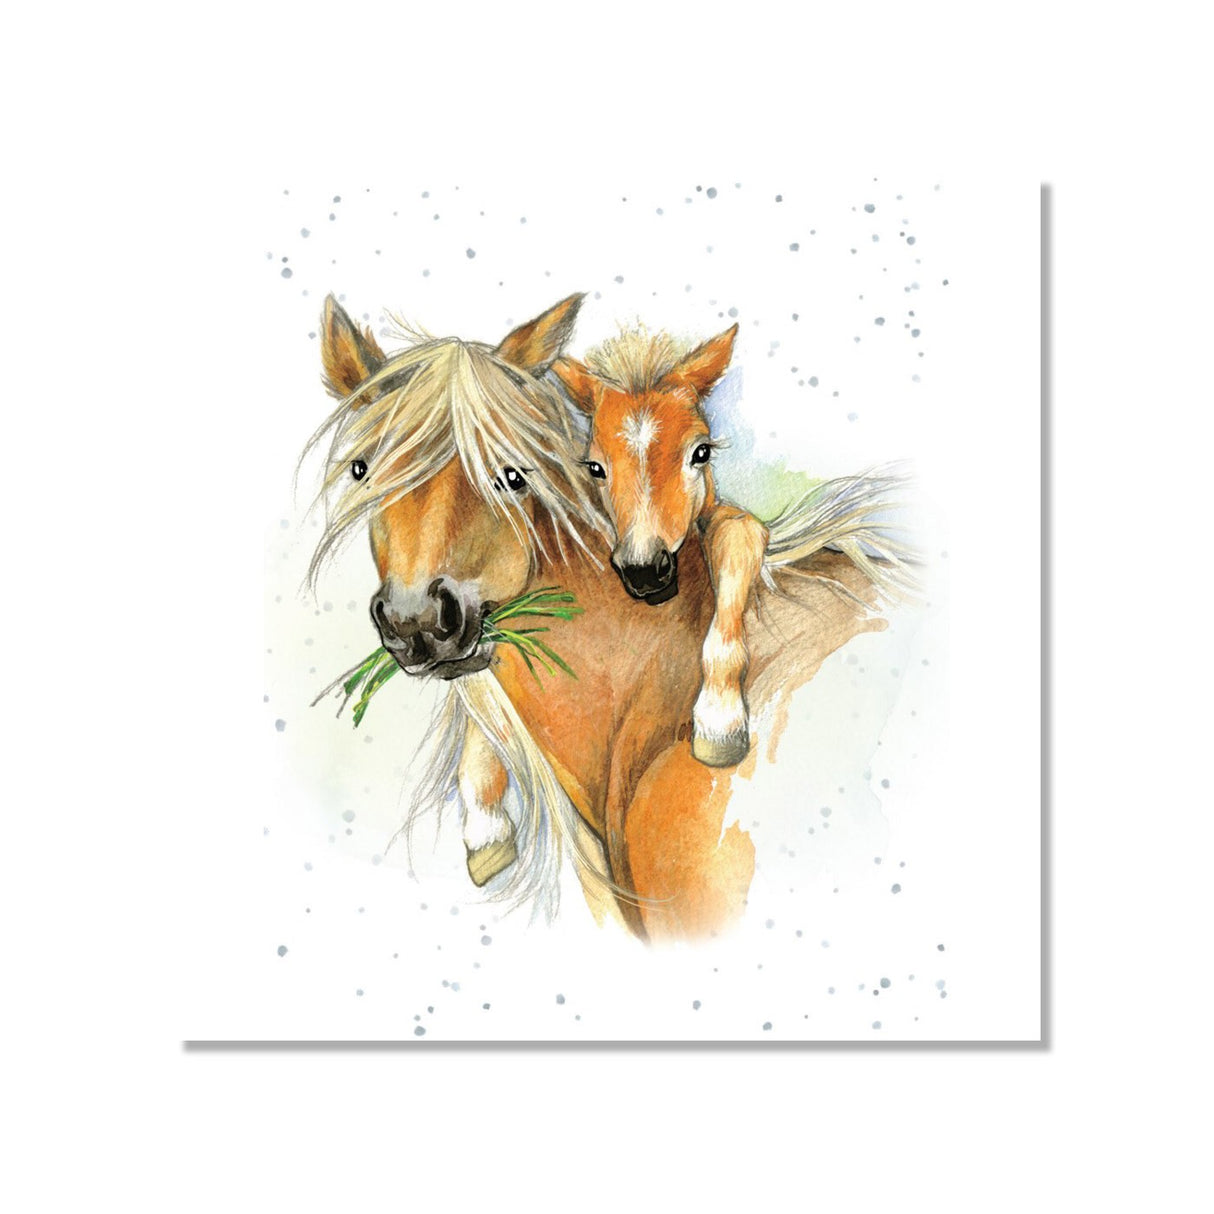 Bella Flor Hopper Along for the Ride Small Greeting Card